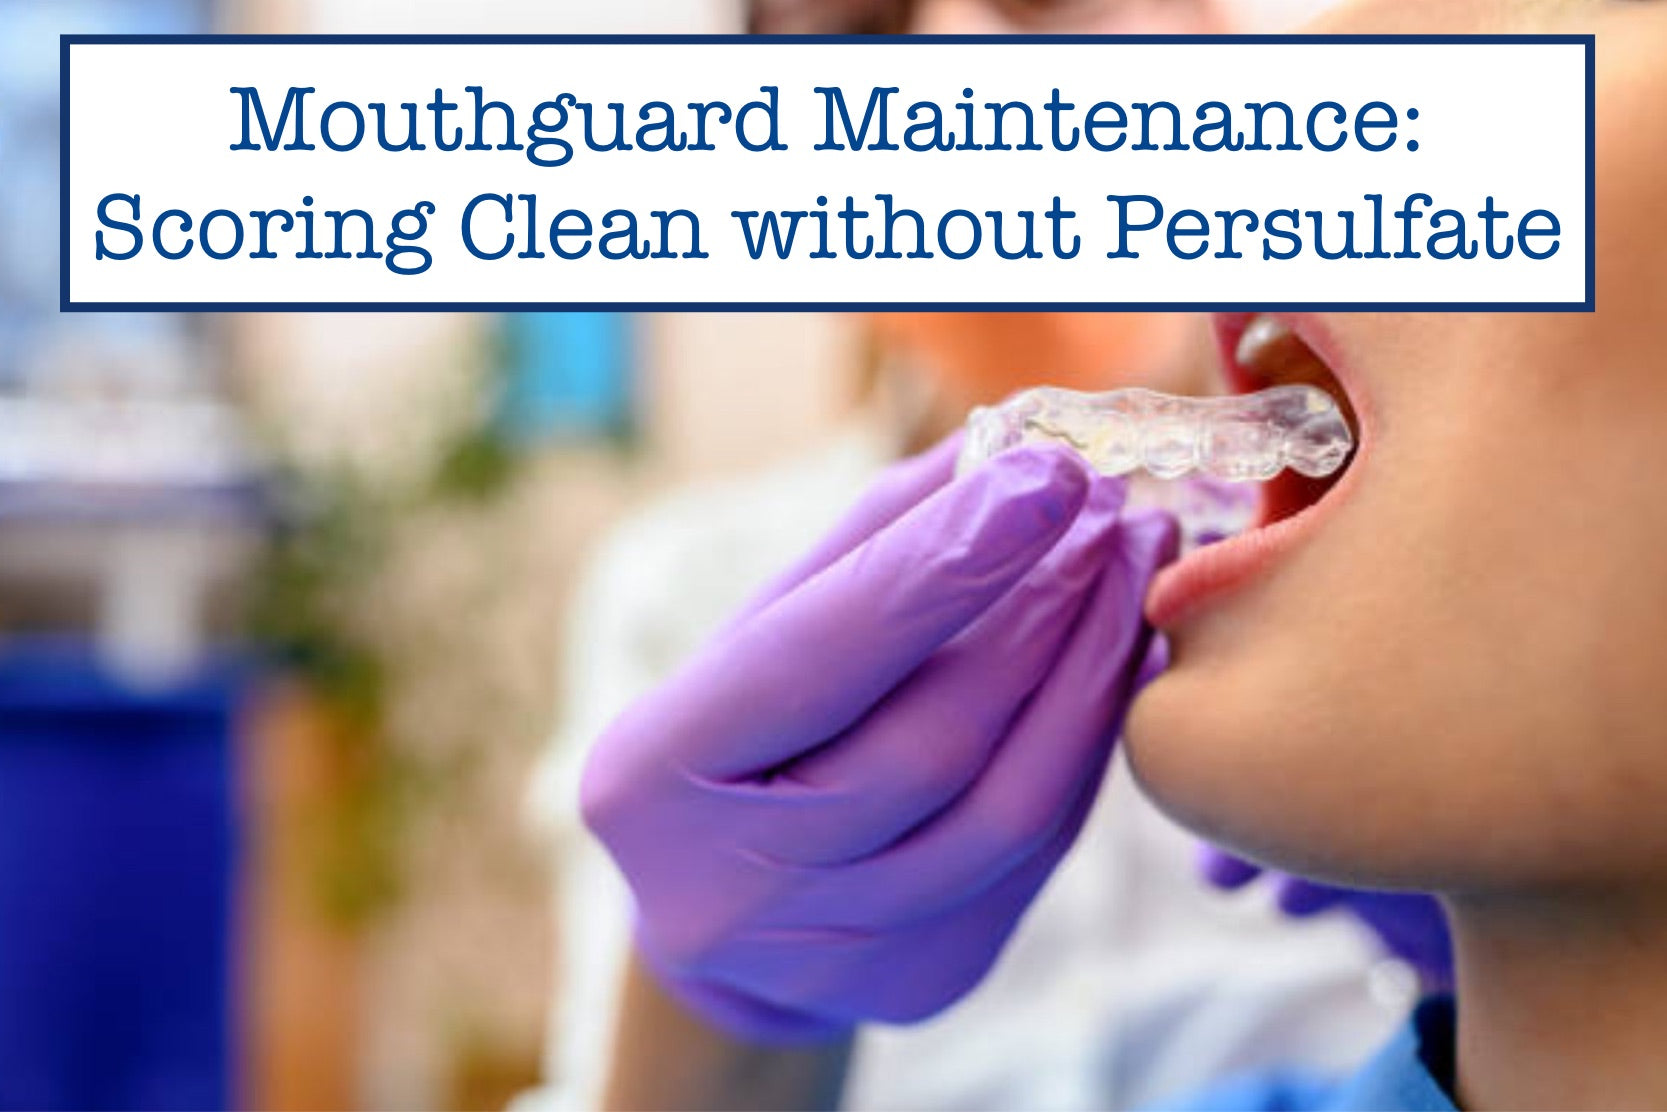 Mouthguard Maintenance: Scoring Clean without Persulfate